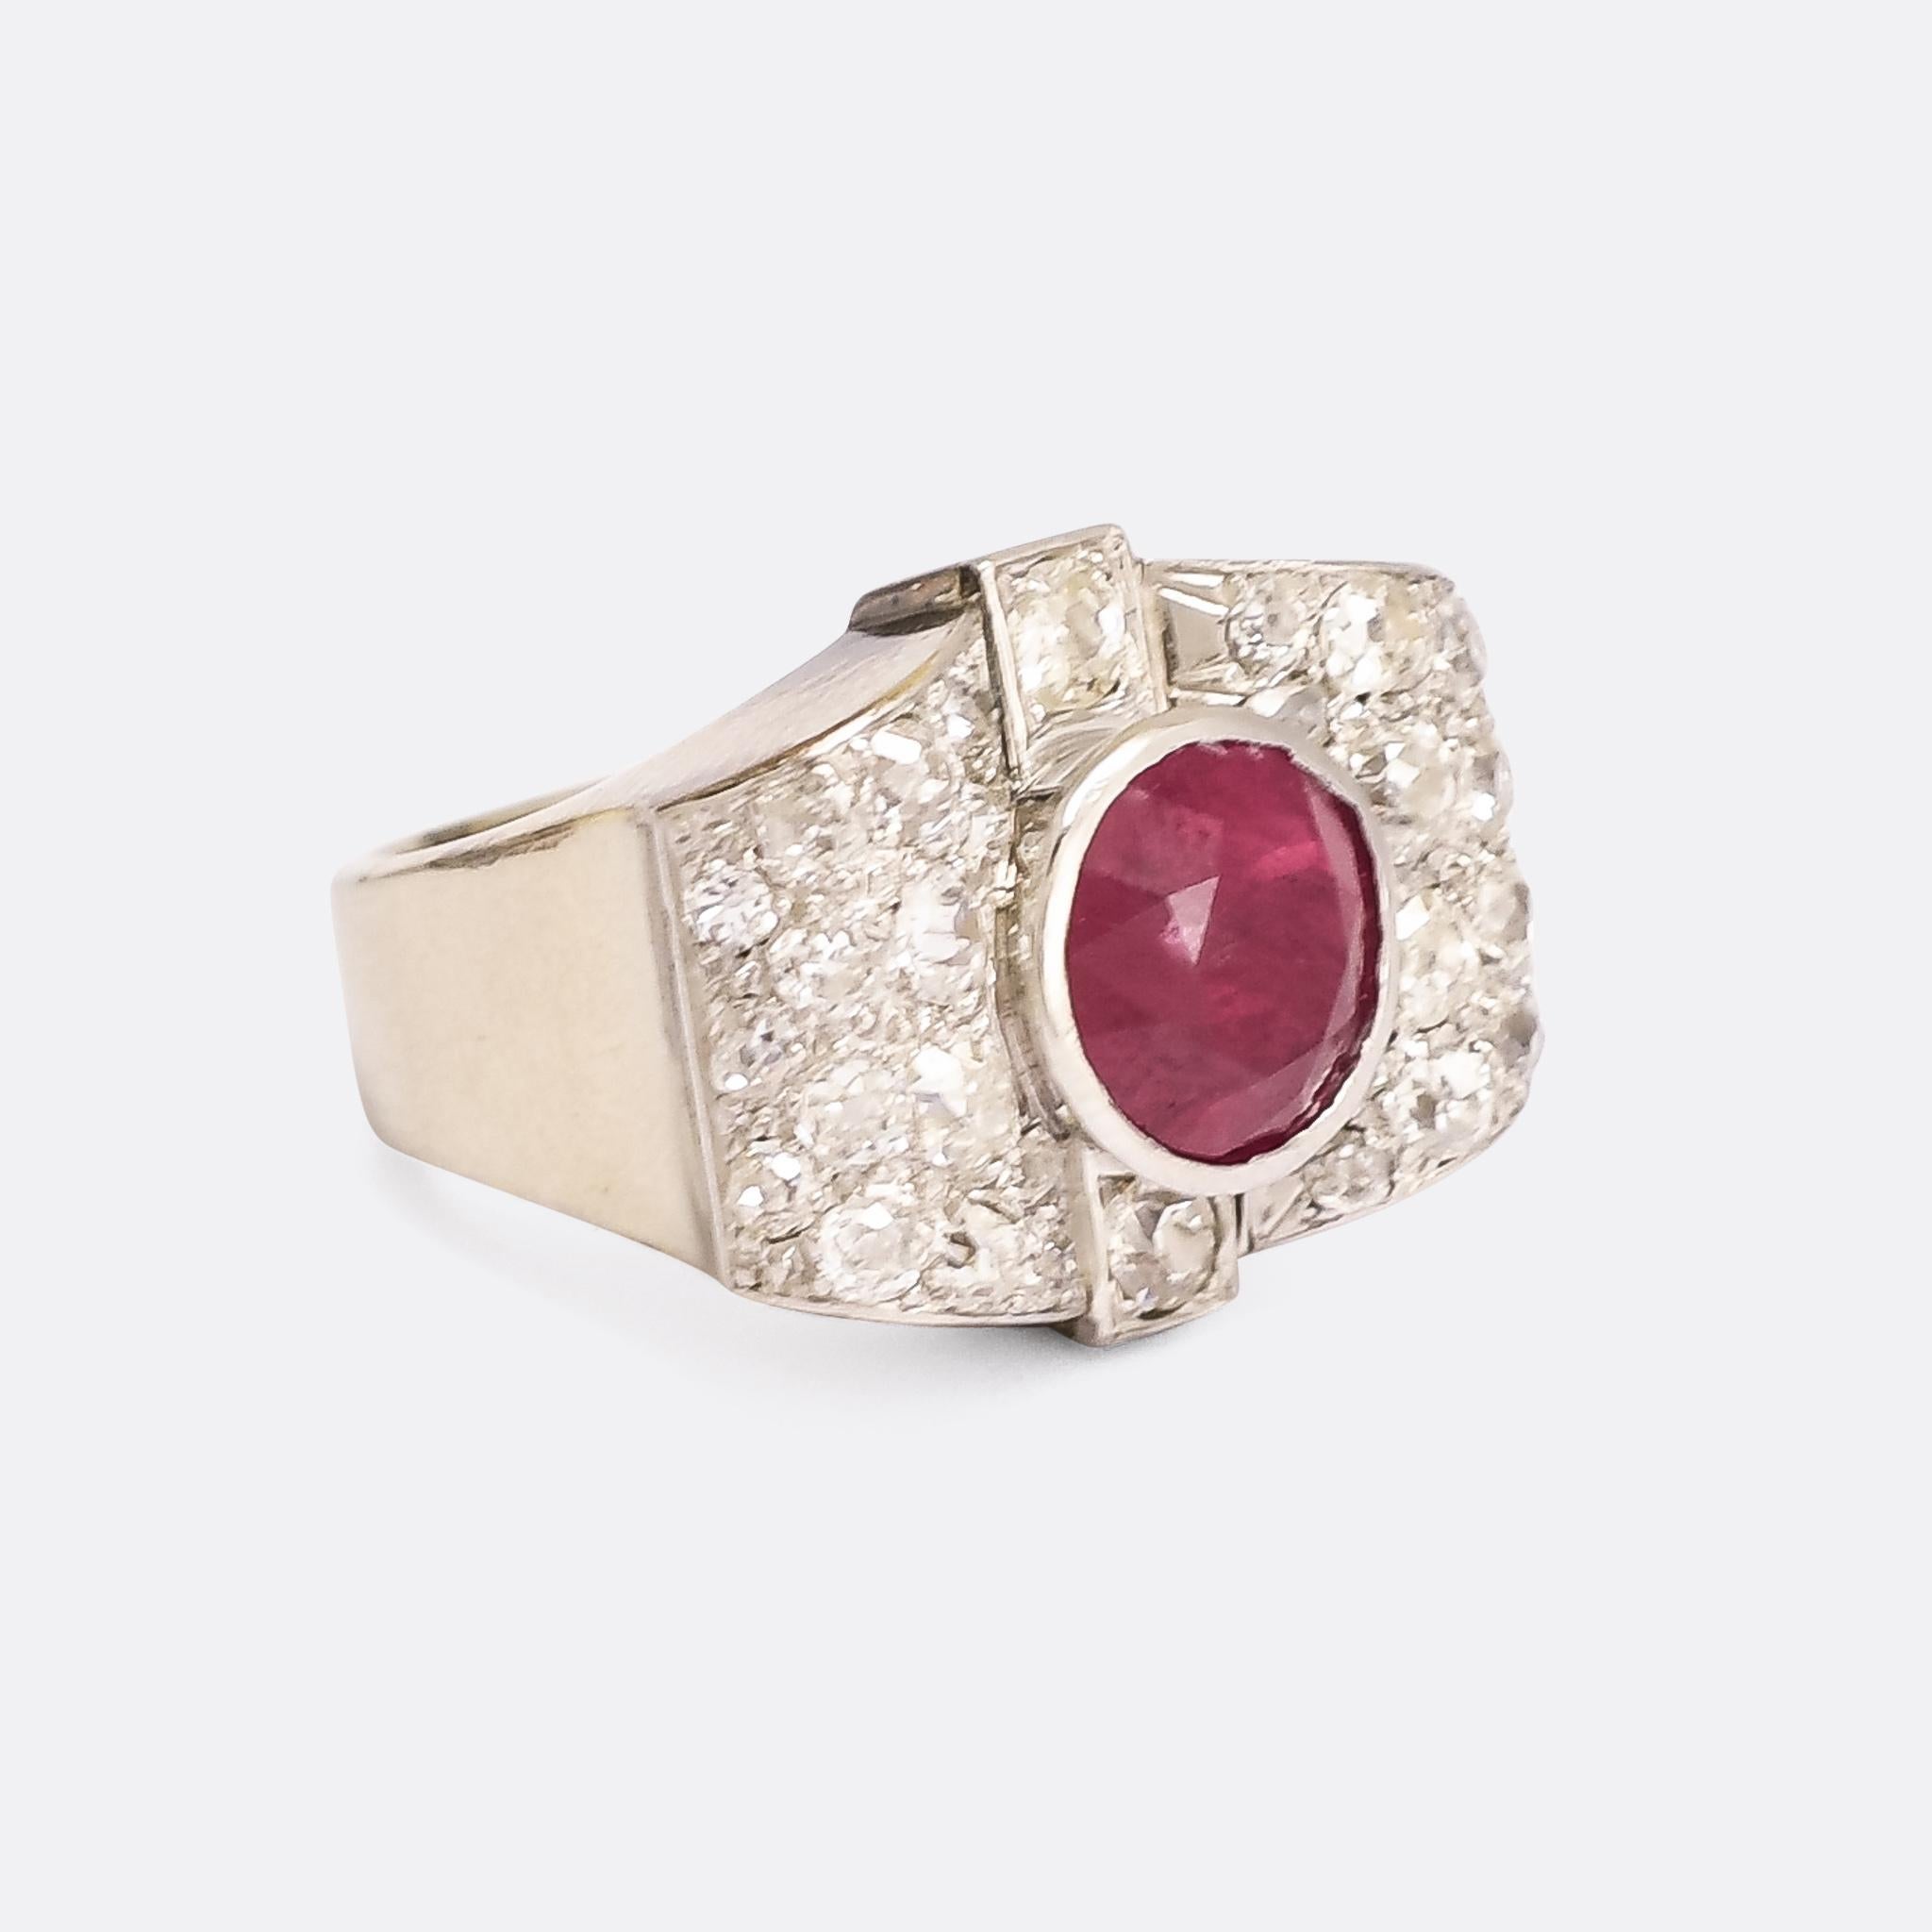 An incredible modernist cocktail ring dating from the 1950s. The principal stone is a mouthwatering 4.77 carat no heat Burma ruby, bezel set within two waves of pavé old mine cut diamonds. It's crafted in platinum throughout, with French hallmarks